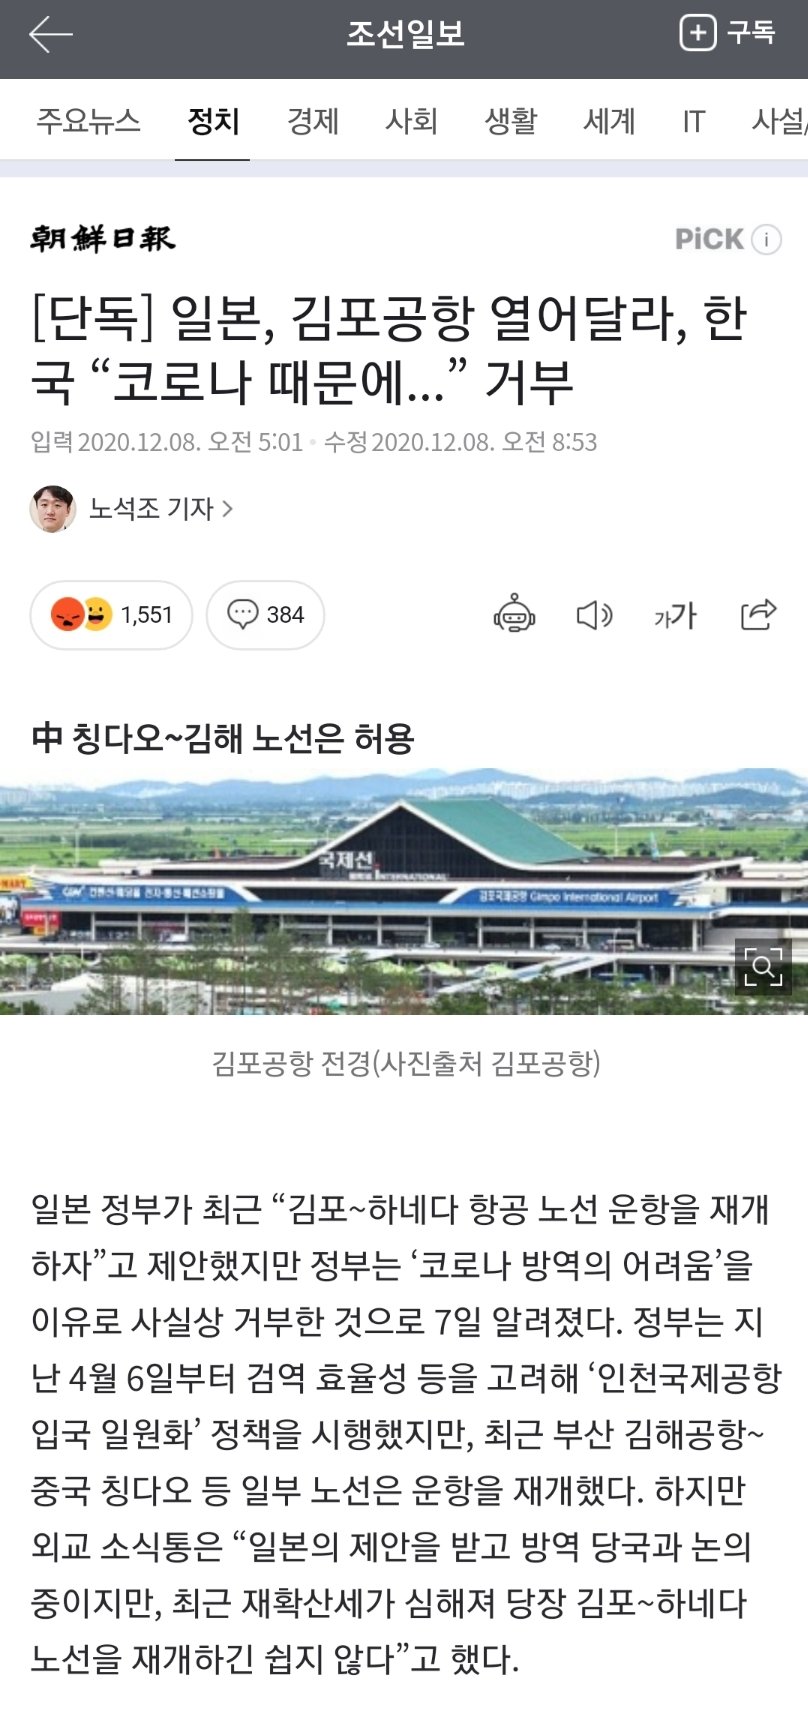 Japan to Open Gimpo Airport, Korea "Because of Corona..." Reject